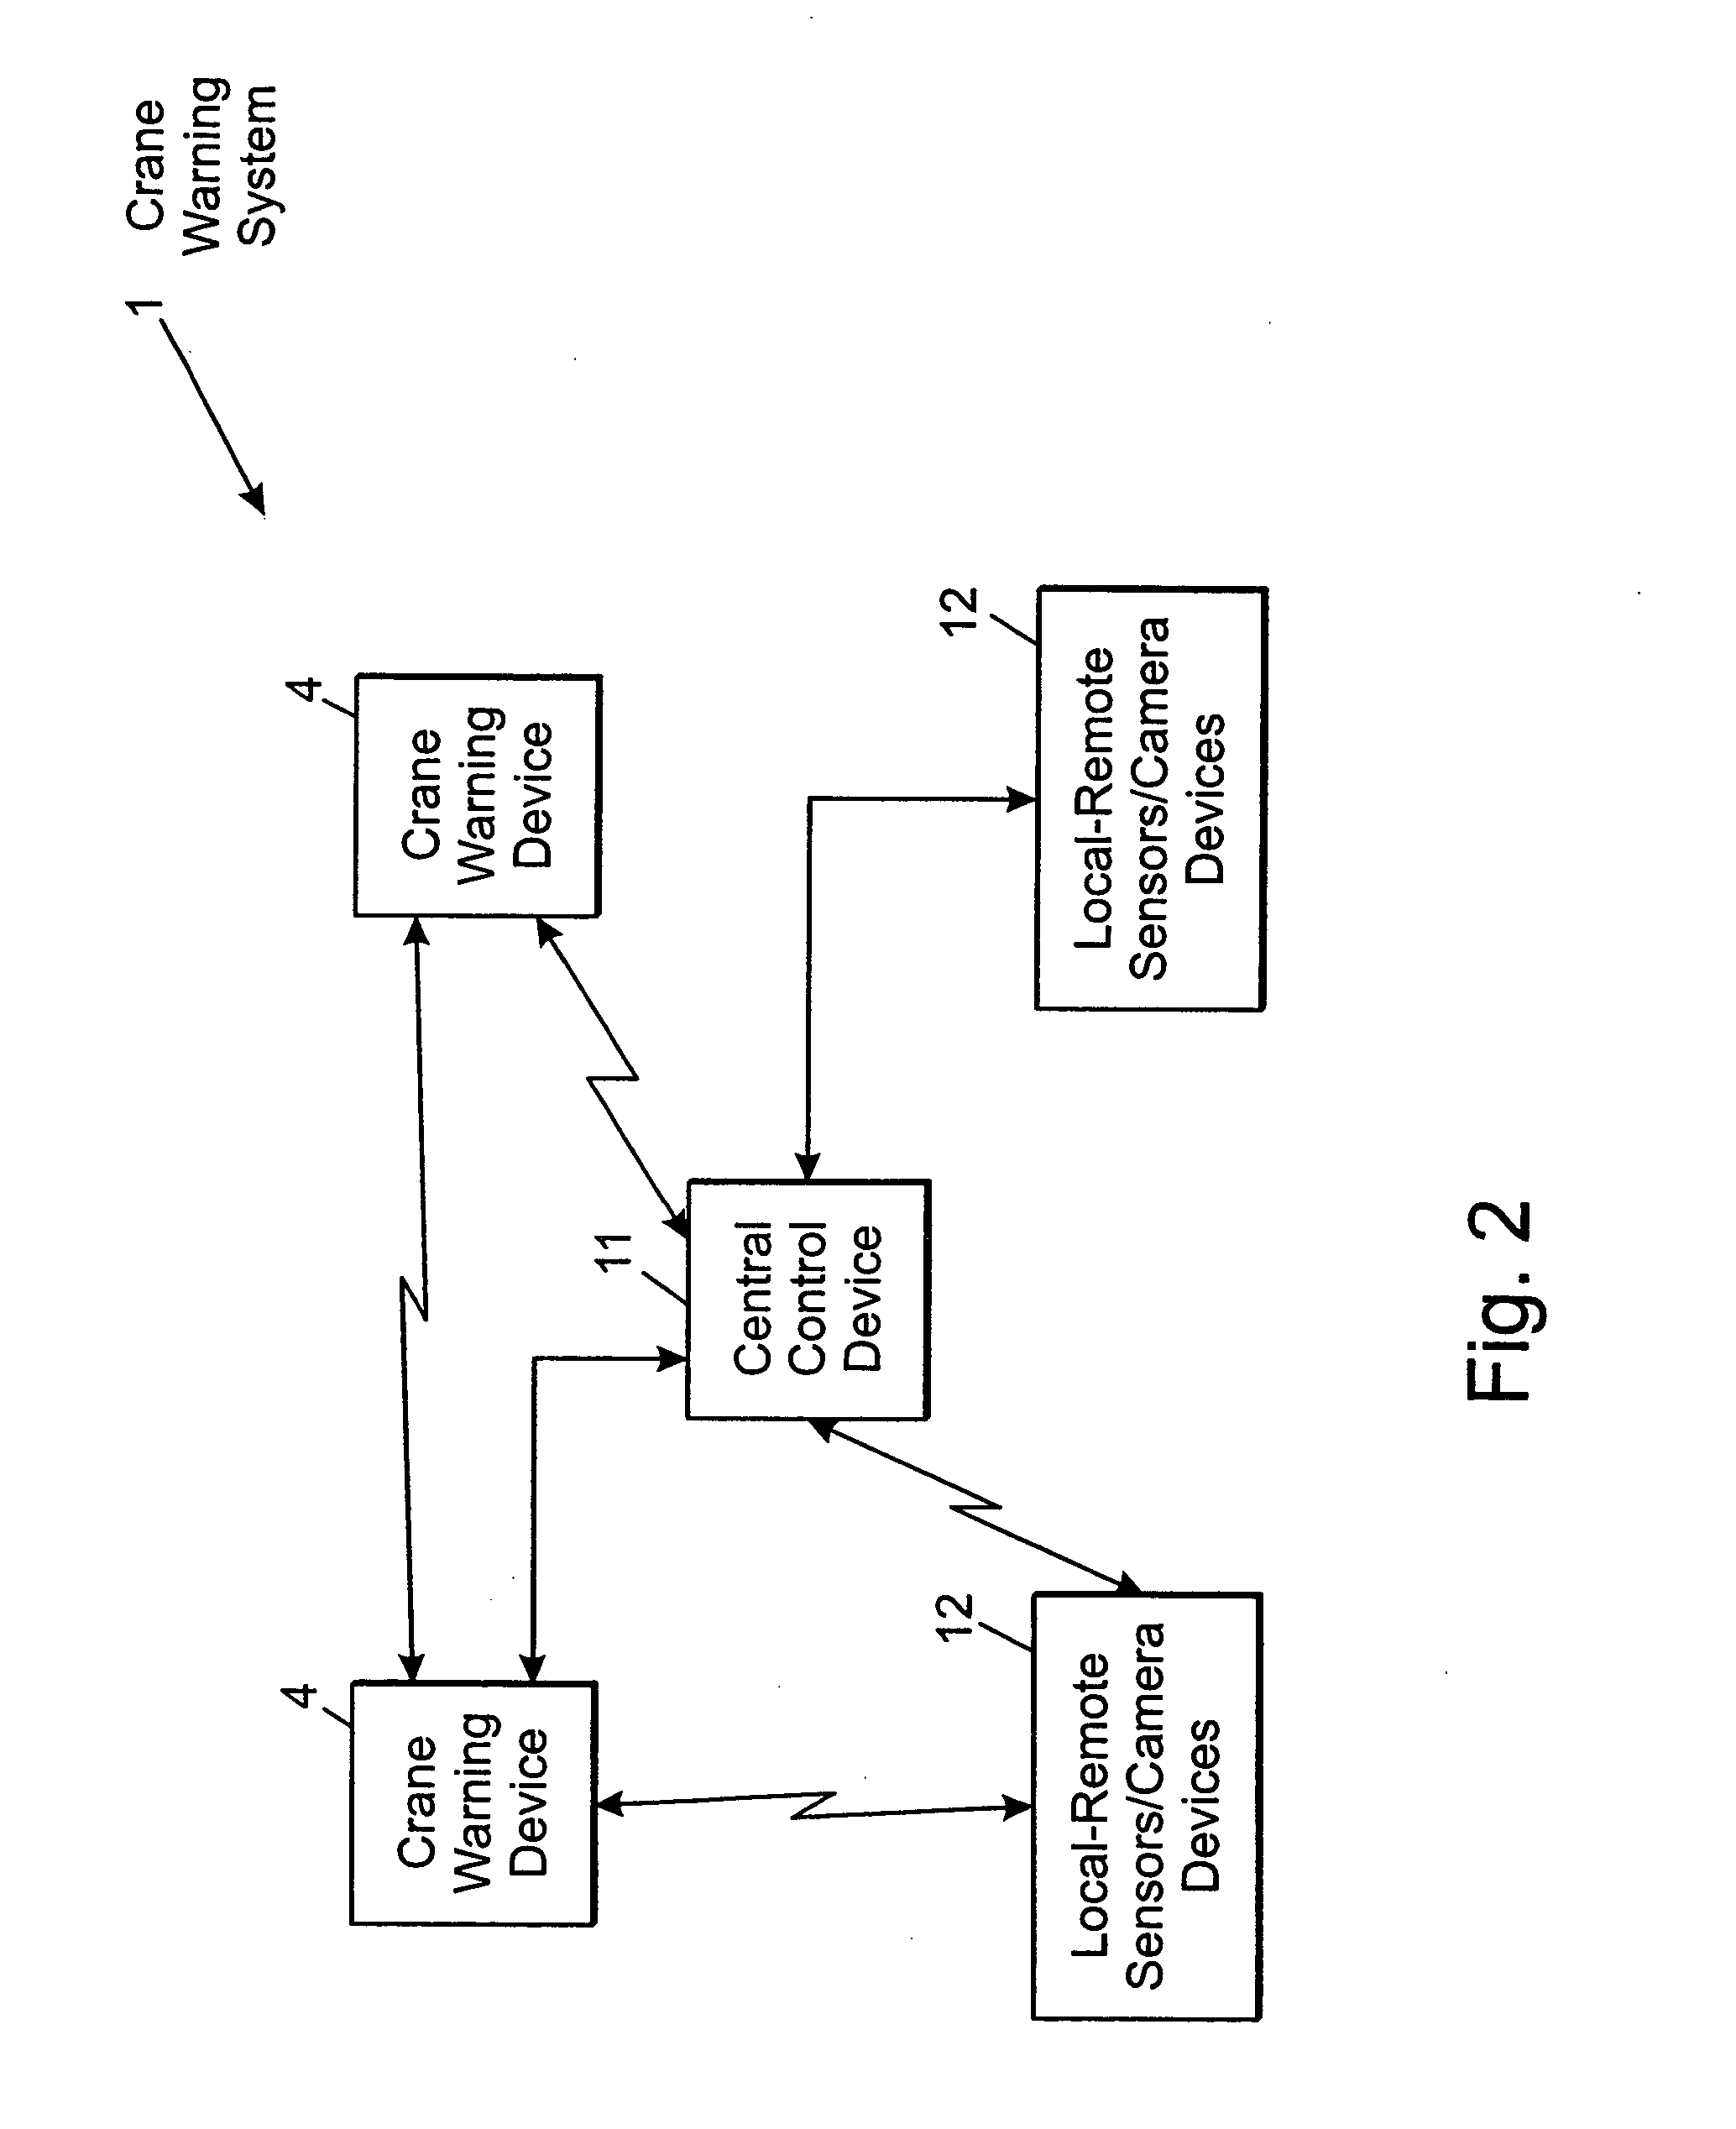 Crane safety devices and methods